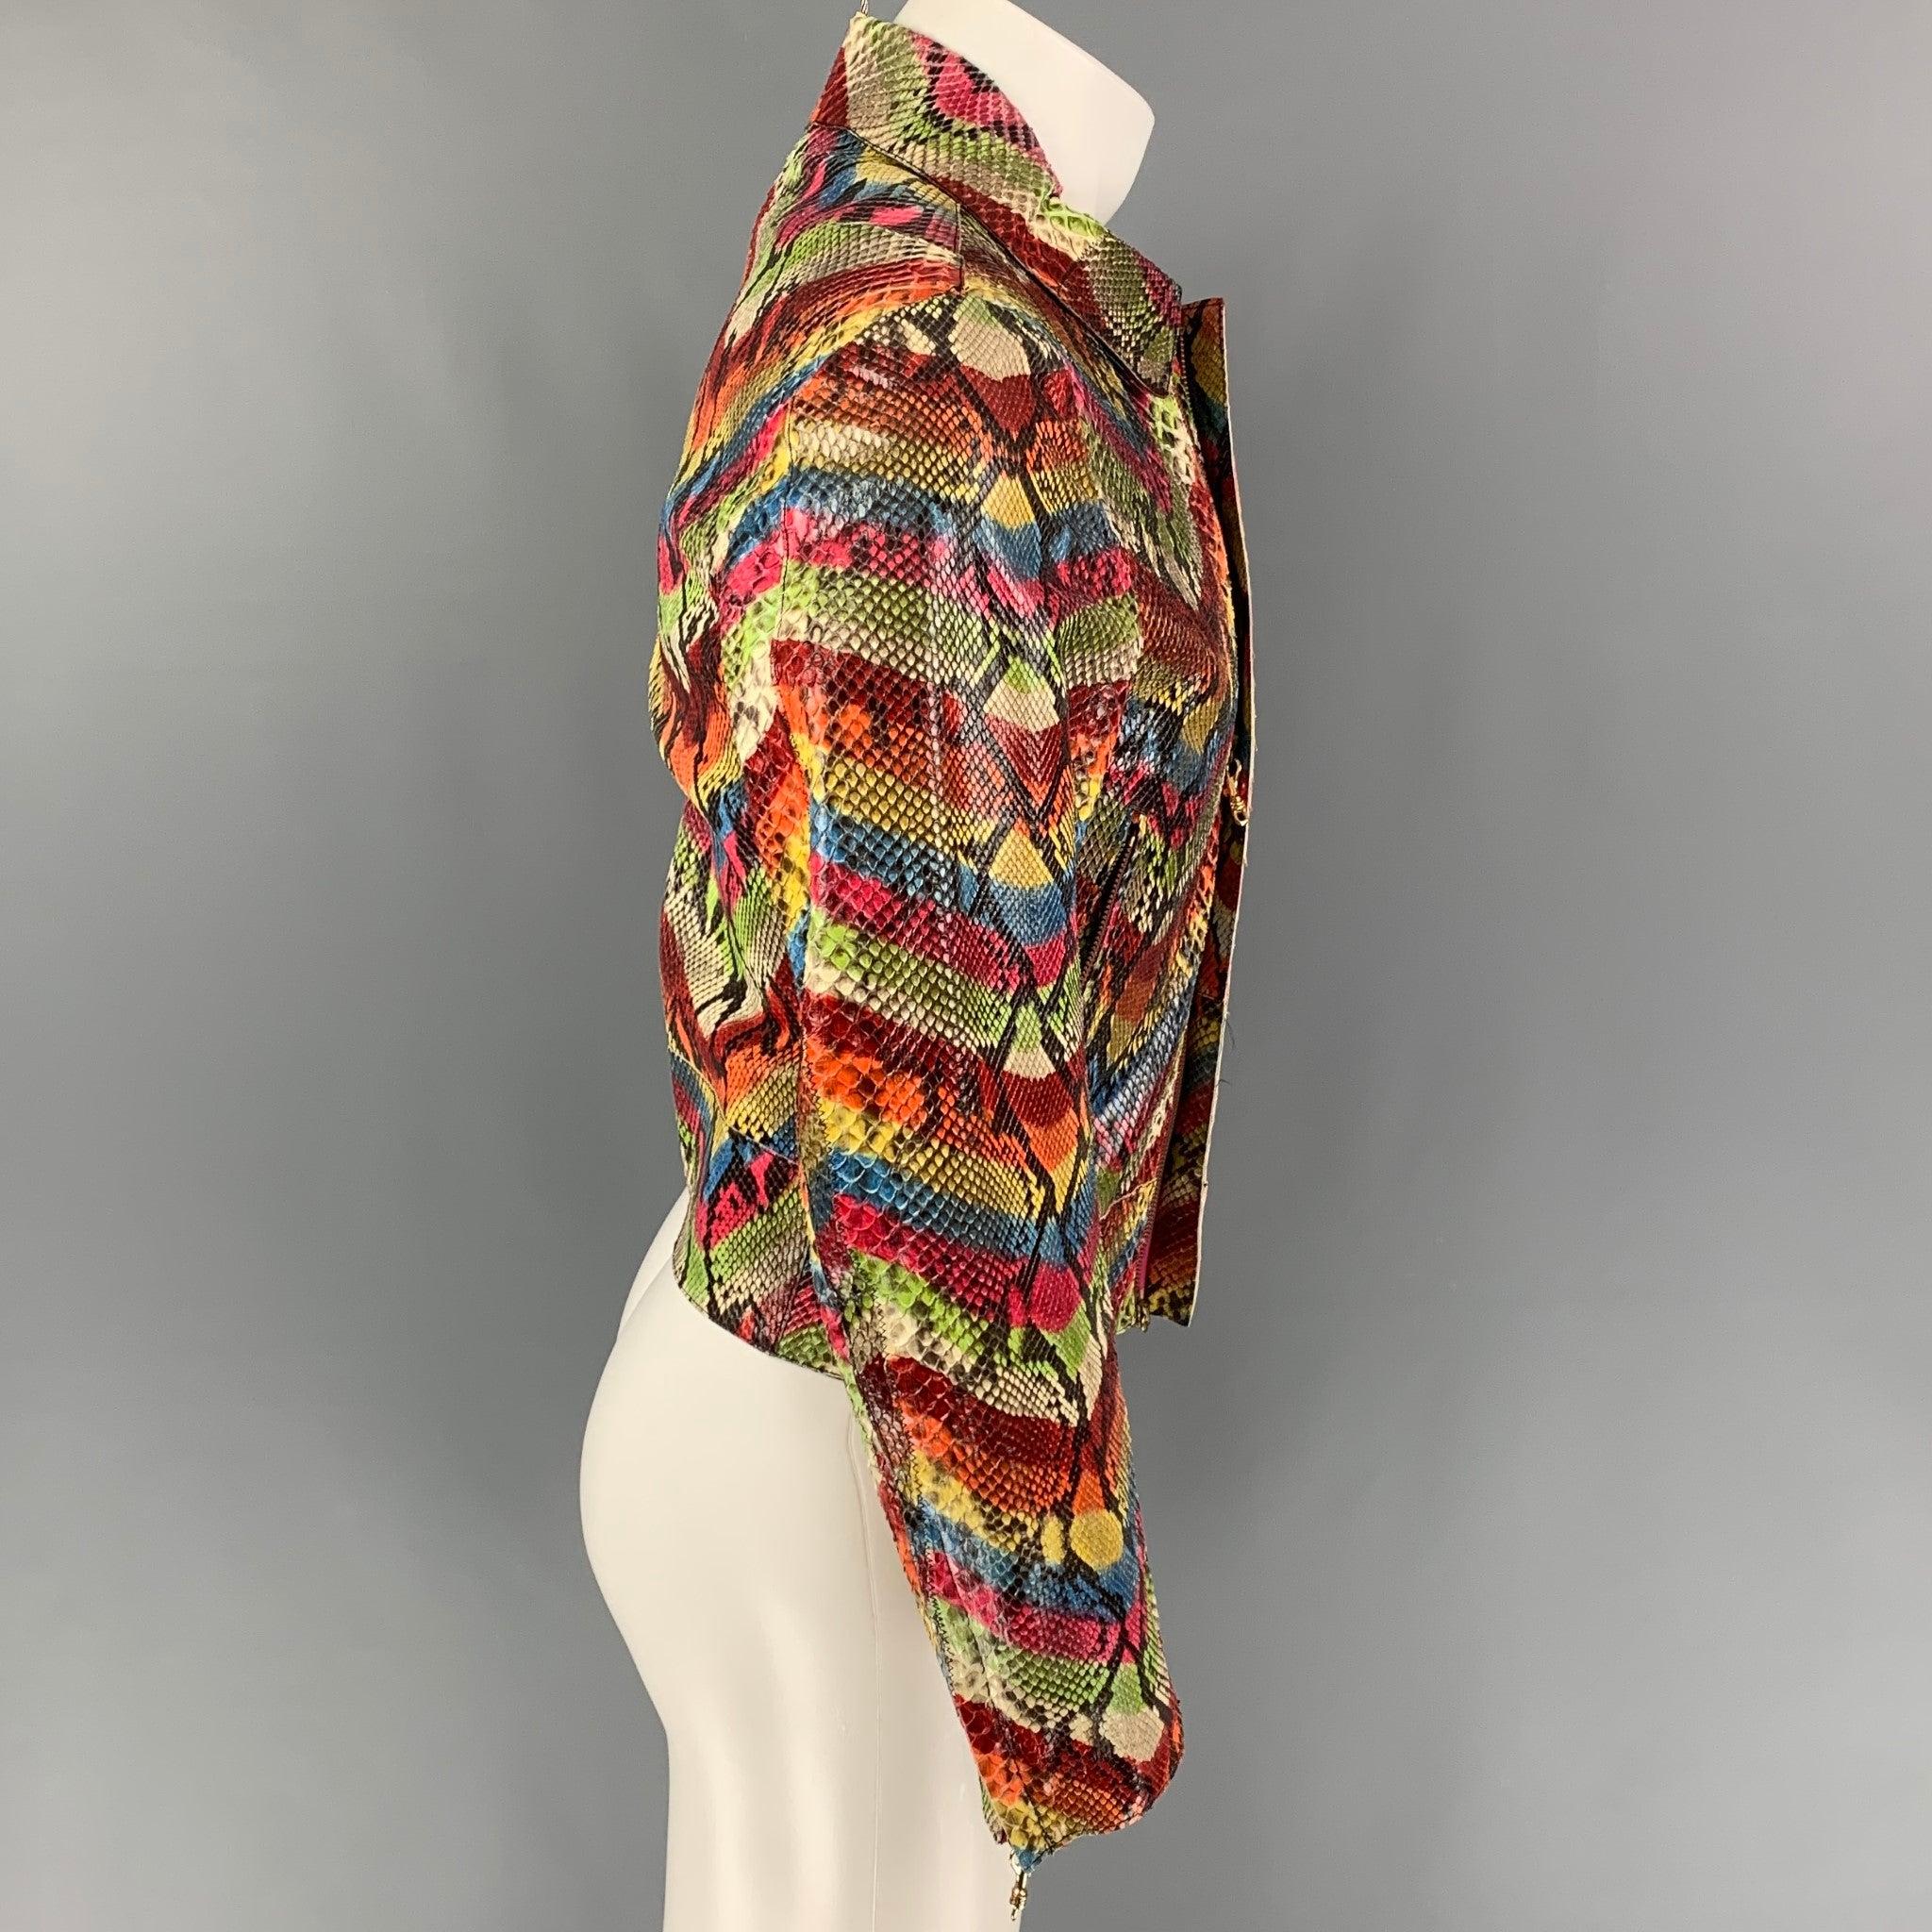 ROBERTO CAVALLI jacket comes in a multi-color chevron phyton skin featuring a spread collar, zipped sleeves, zipper pockets, and a hidden placket closure. Made in Italy.
Very Good
Pre-Owned Condition. Fabric tag removed.  

Marked:   Size tag